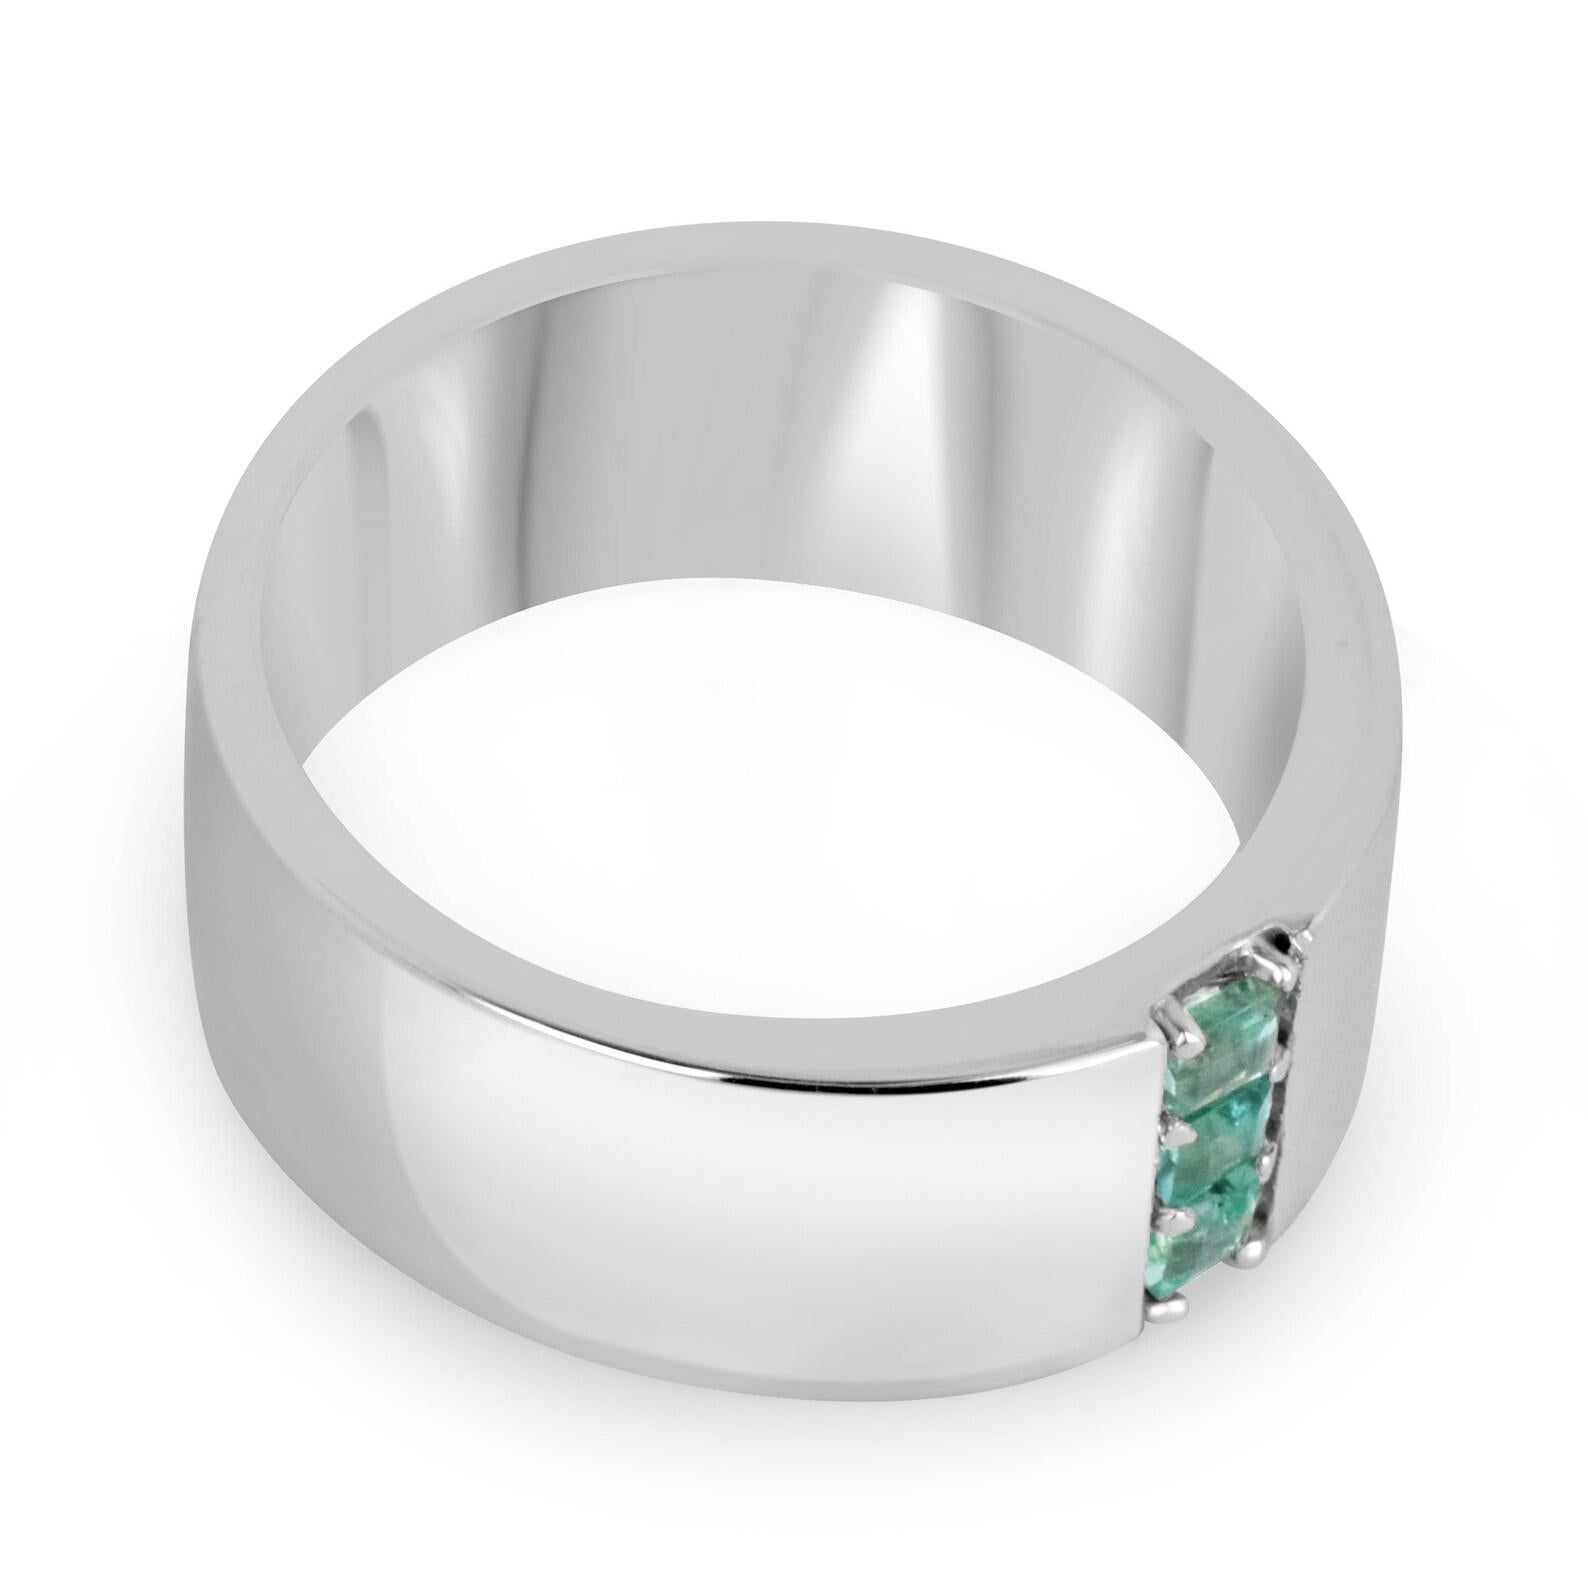 A dapper natural emerald men's ring that features three petite Asscher cut emeralds in the very center; creating a unique three-stone look that showcases vertically. Ideal for everyday use, and crafted in shiny sterling silver.

Setting Style: